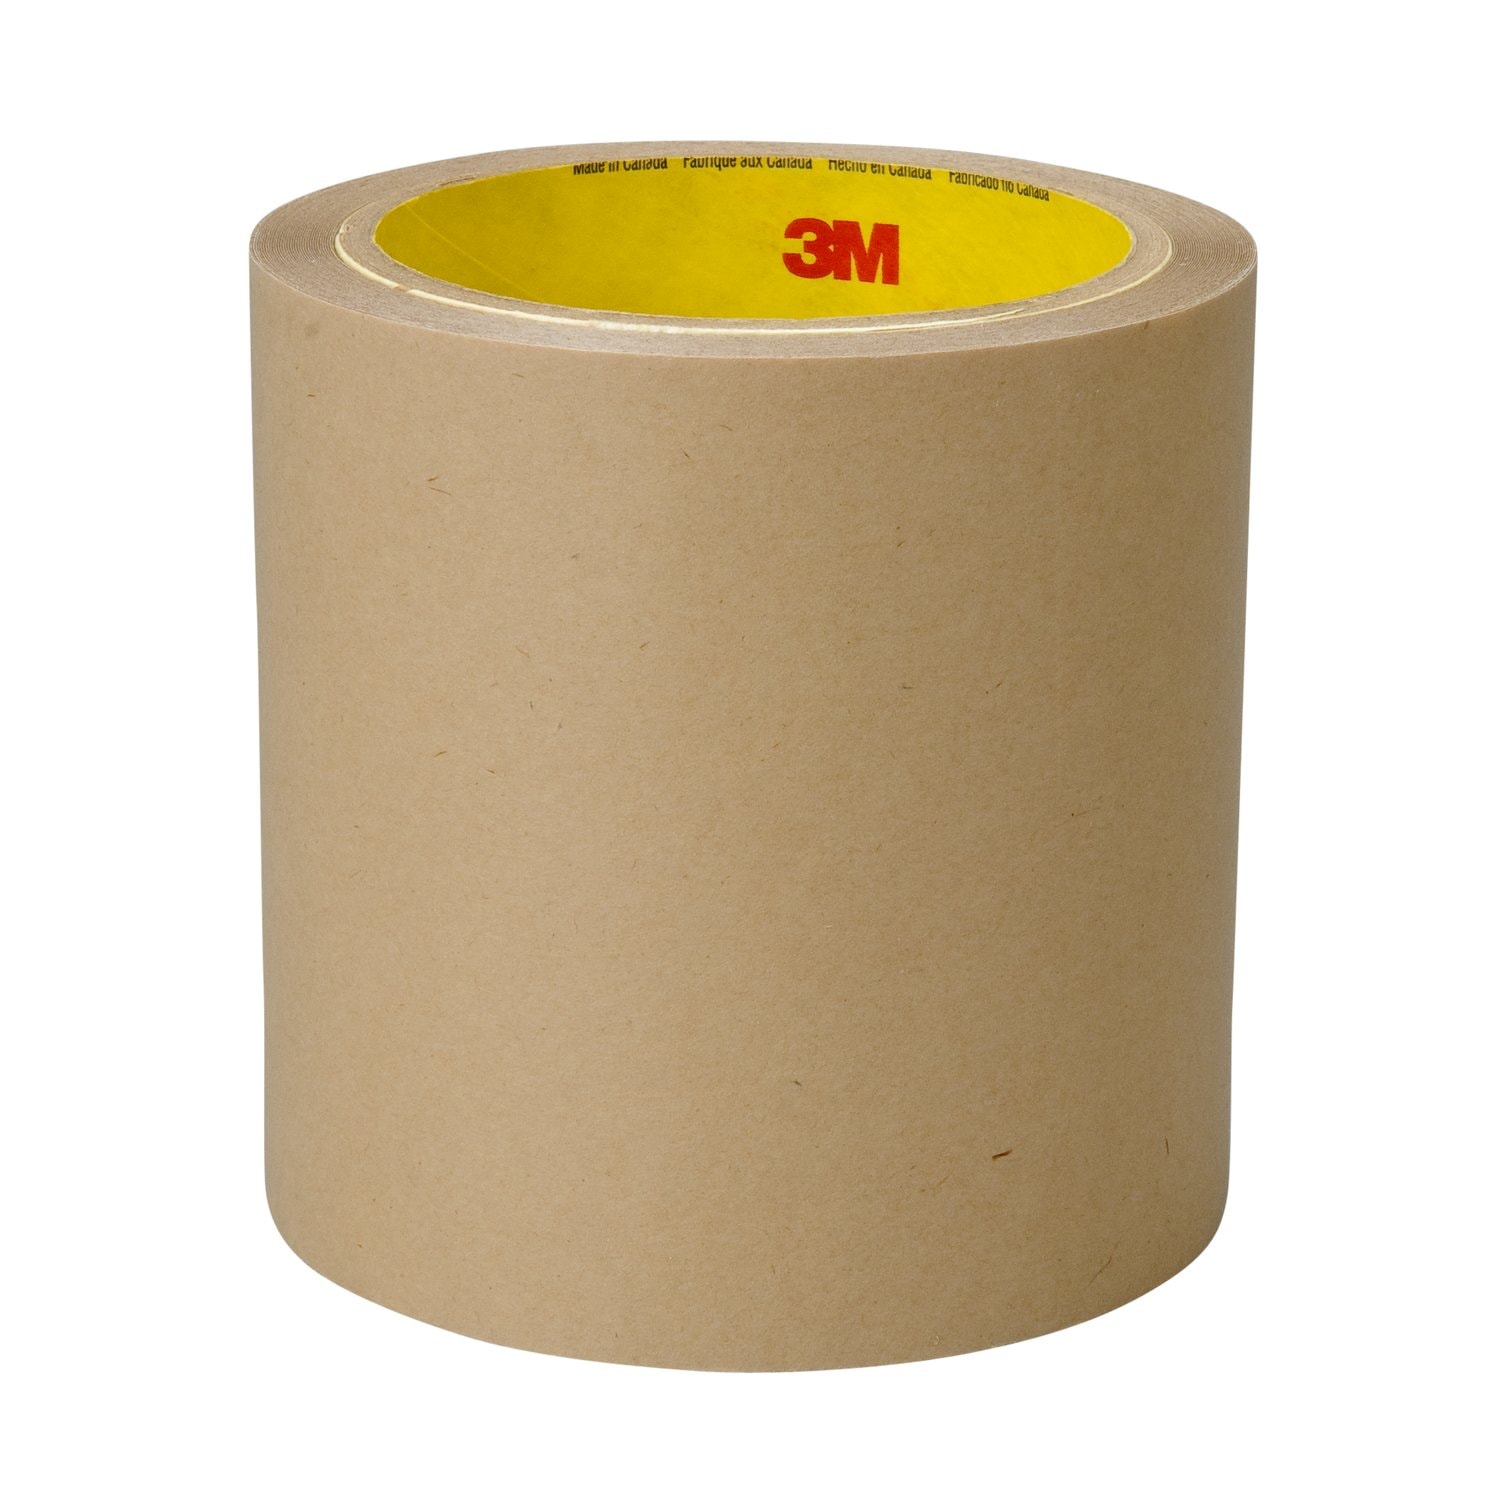 7010373795 - 3M Double Coated Tape 9500PC, Clear, 24 in x 36 yd, 5.6 mil, 1 roll per
case